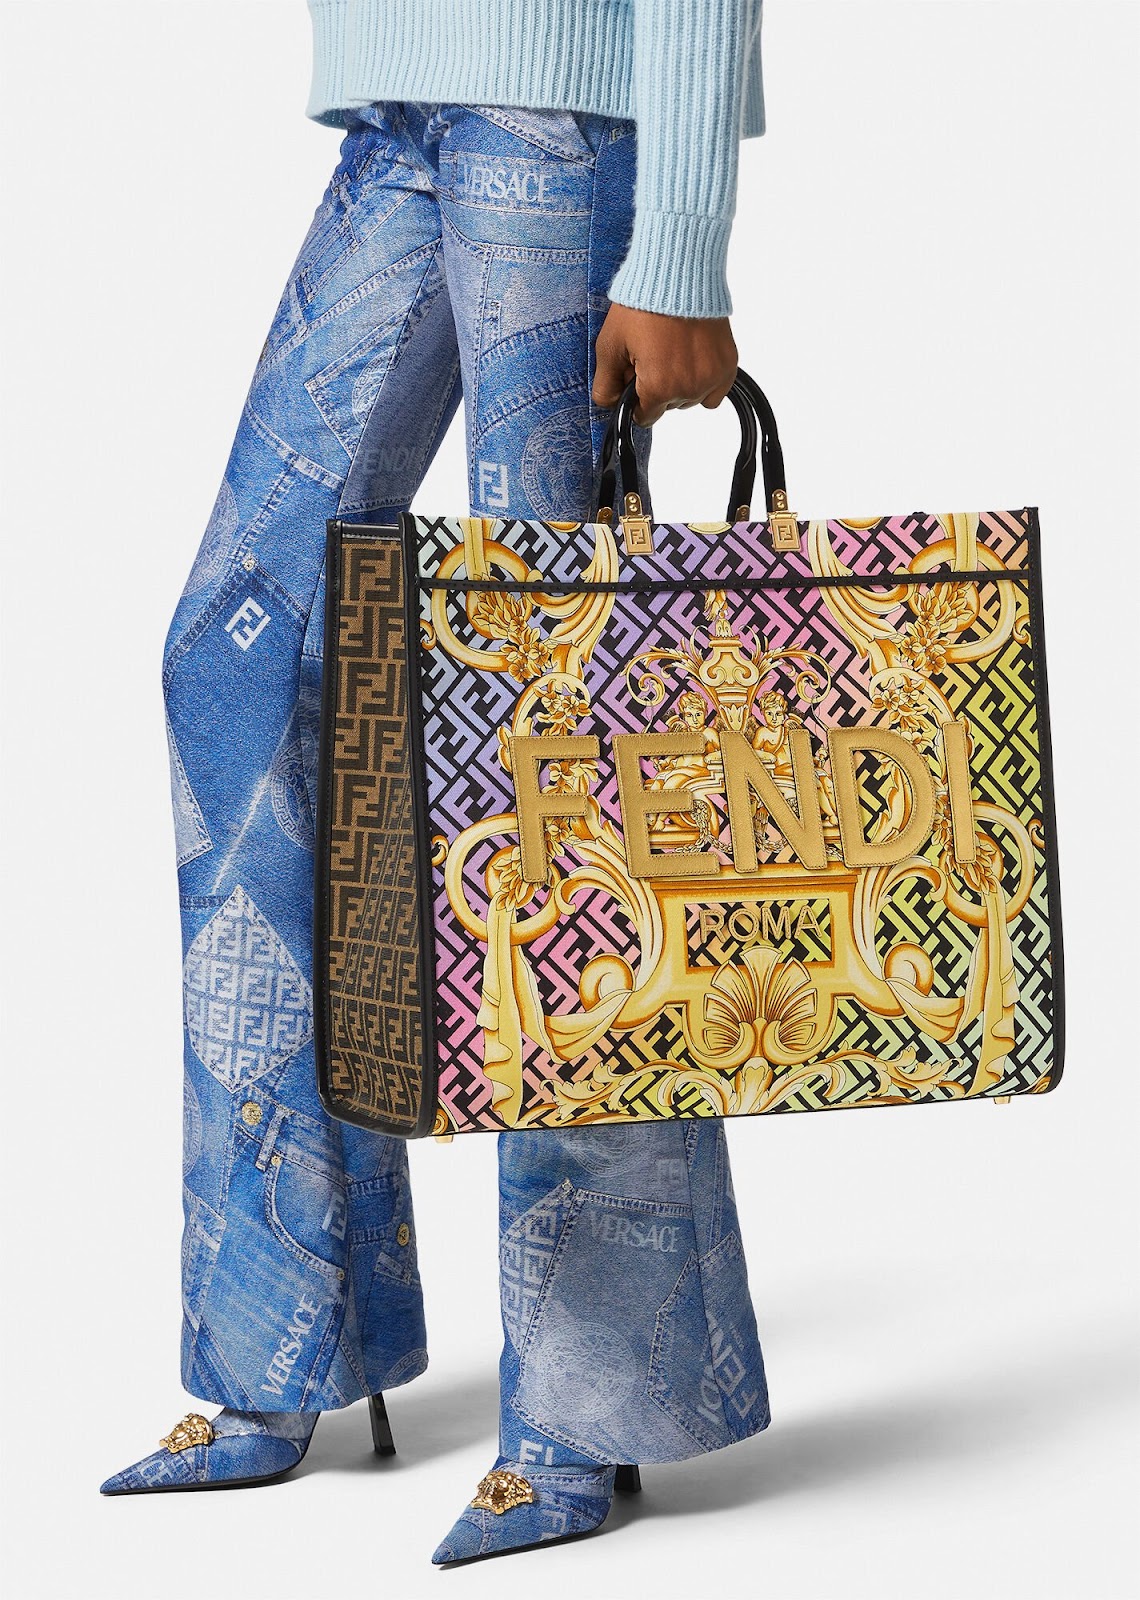 3 Iconic Bags From Versace You Should Already Know